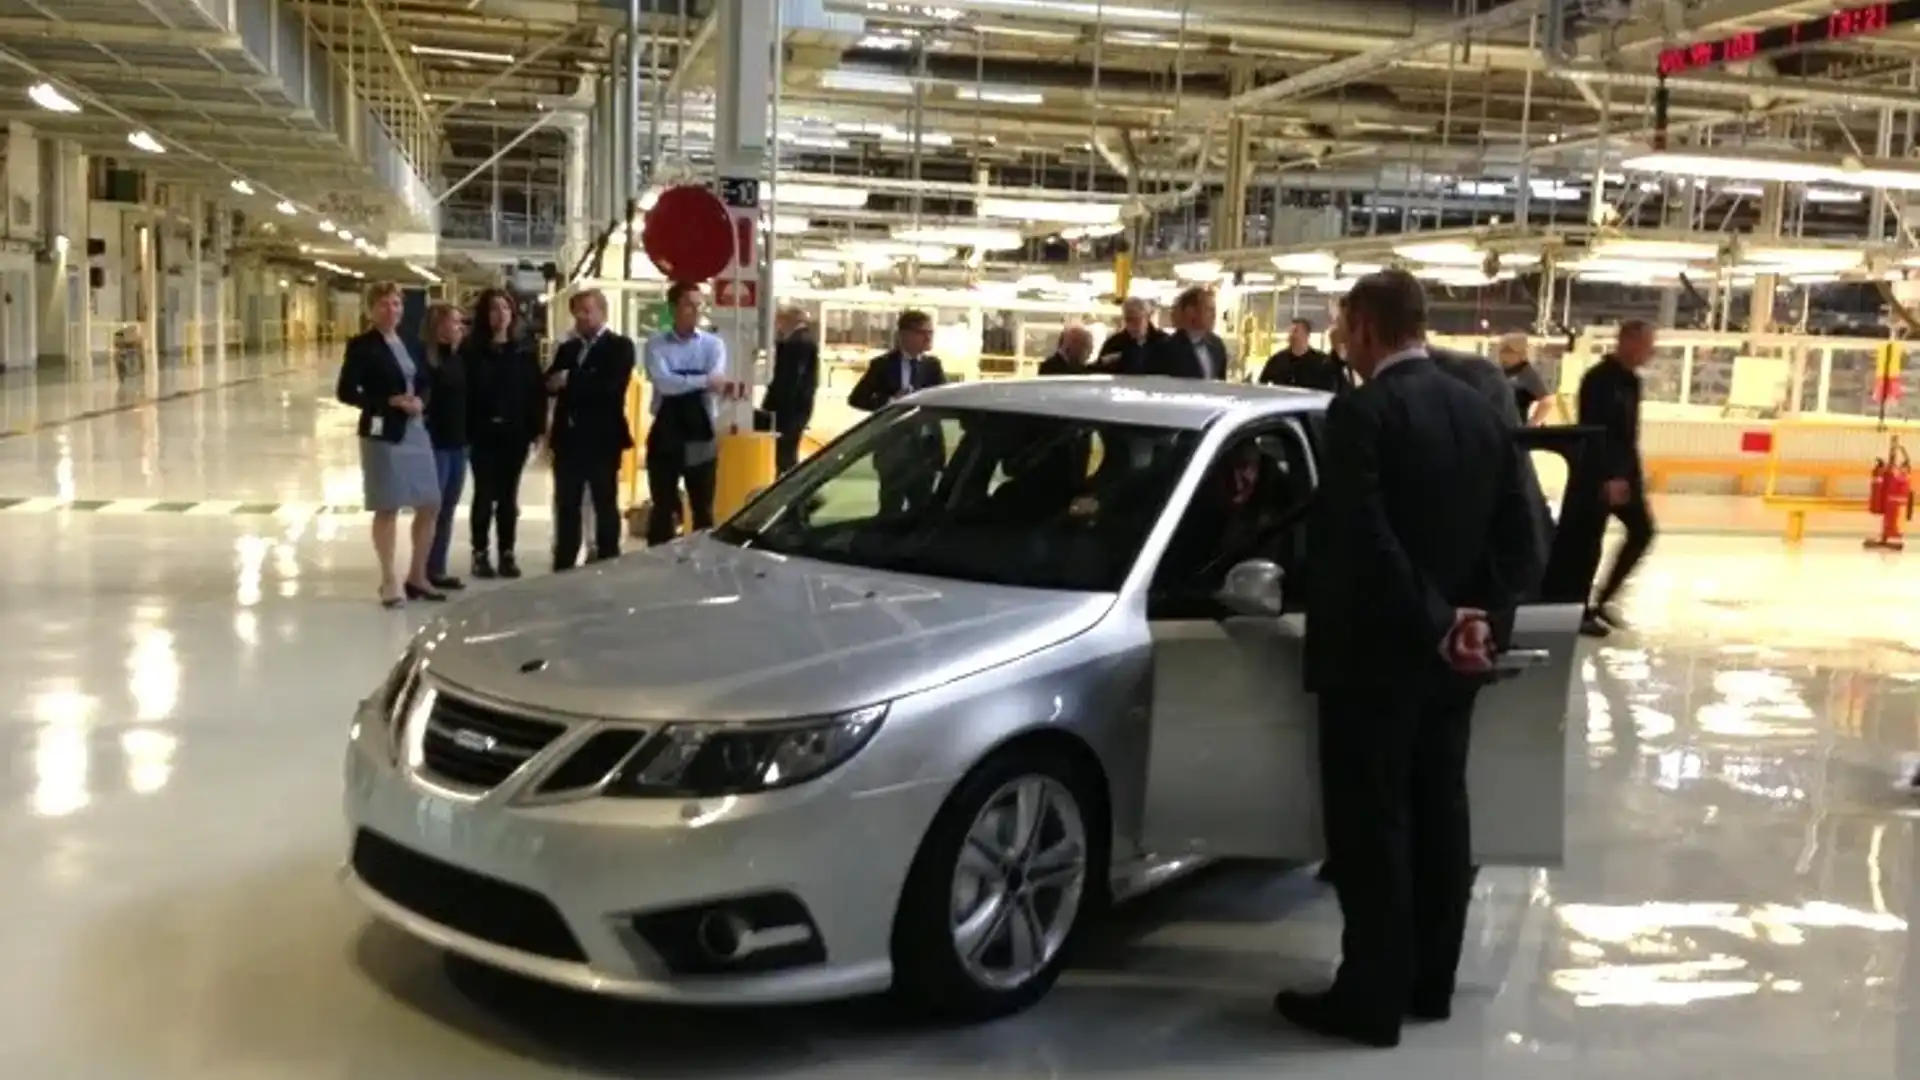 Saab production resumes in Trollhattan under NEVS control